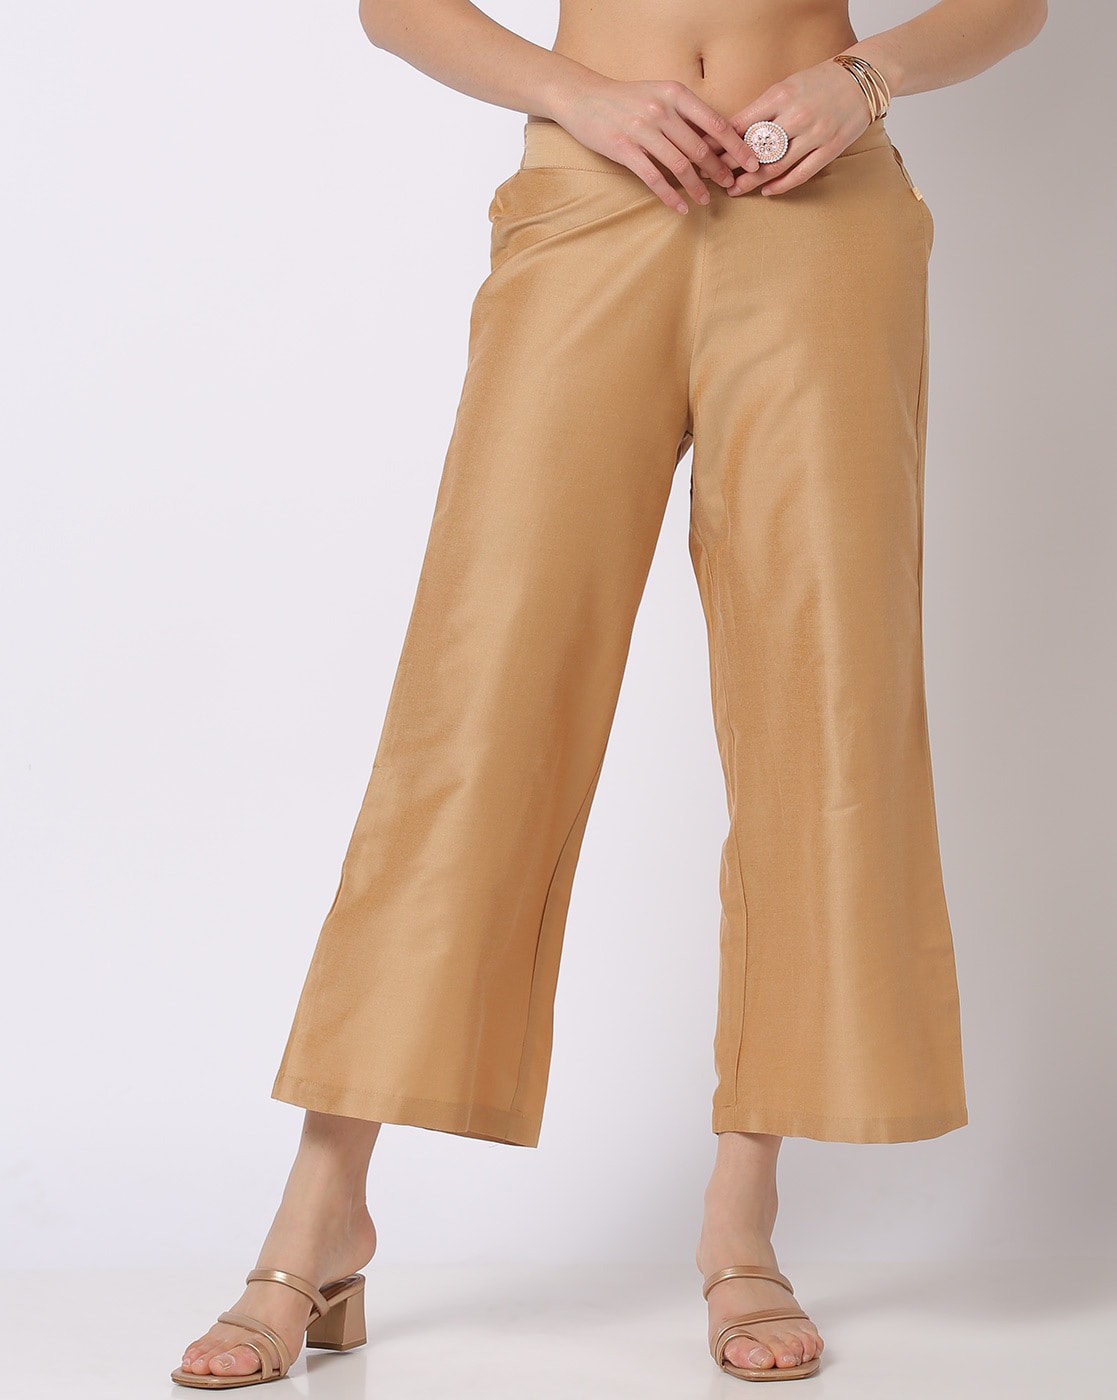 Buy Palazzos with Insert Pockets Online at Best Prices in India - JioMart.